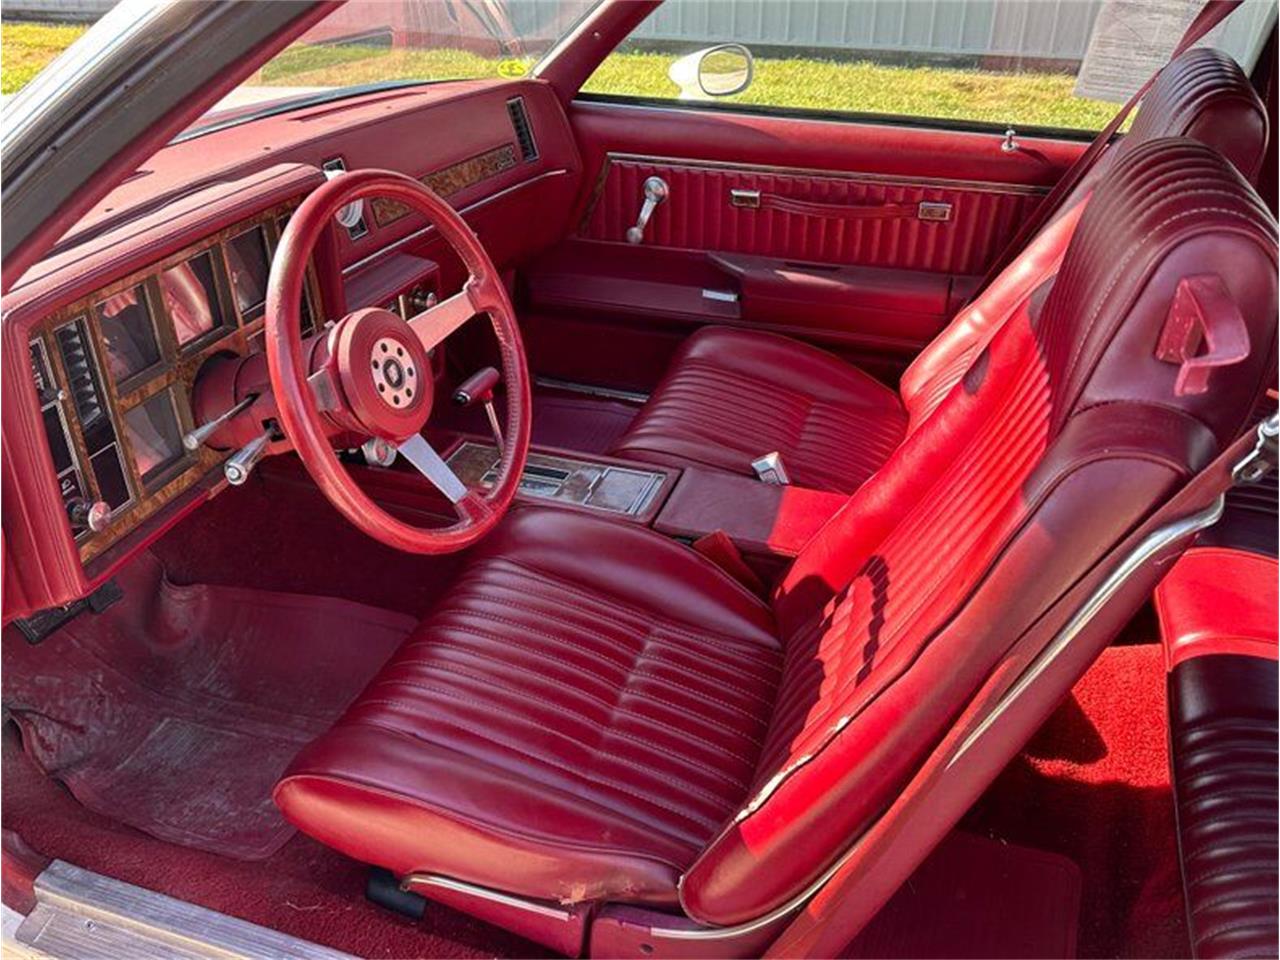 buick, Pick of the Day: 1979 Buick Century Turbo Coupe, ClassicCars.com Journal